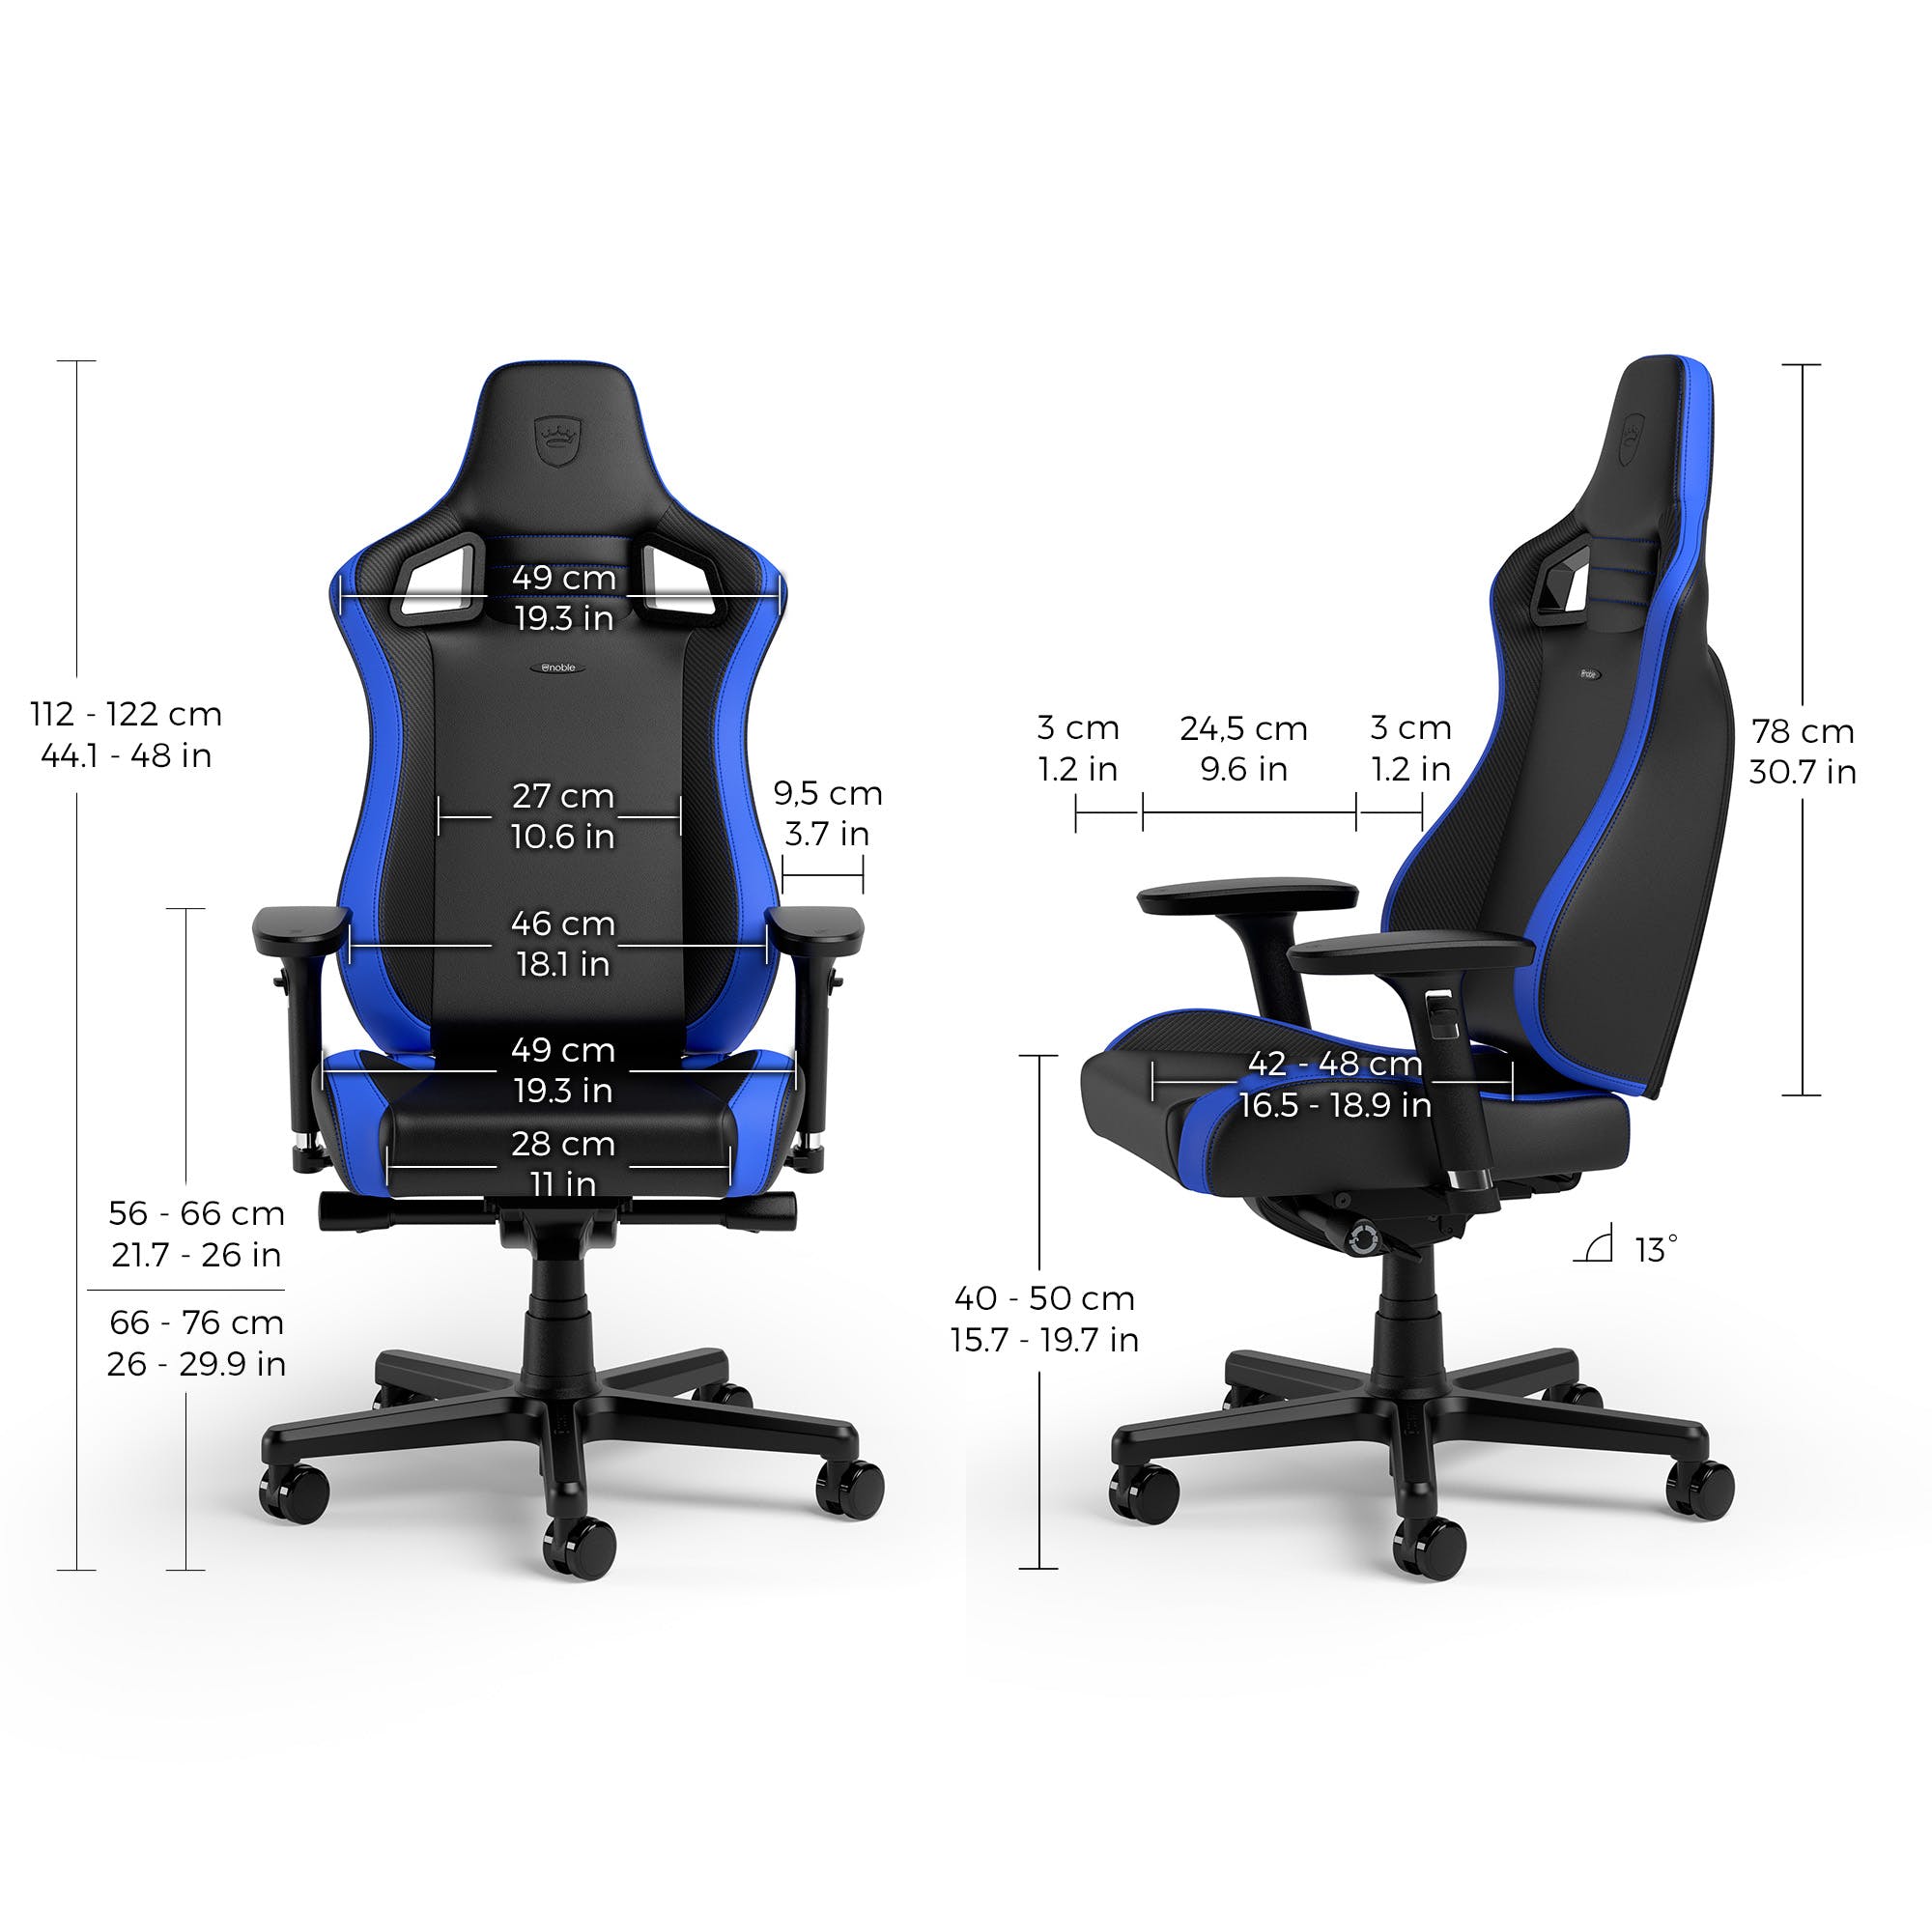 noblechairs - noblechairs EPIC Compact Gaming Chair - Carbon/Black/Blue